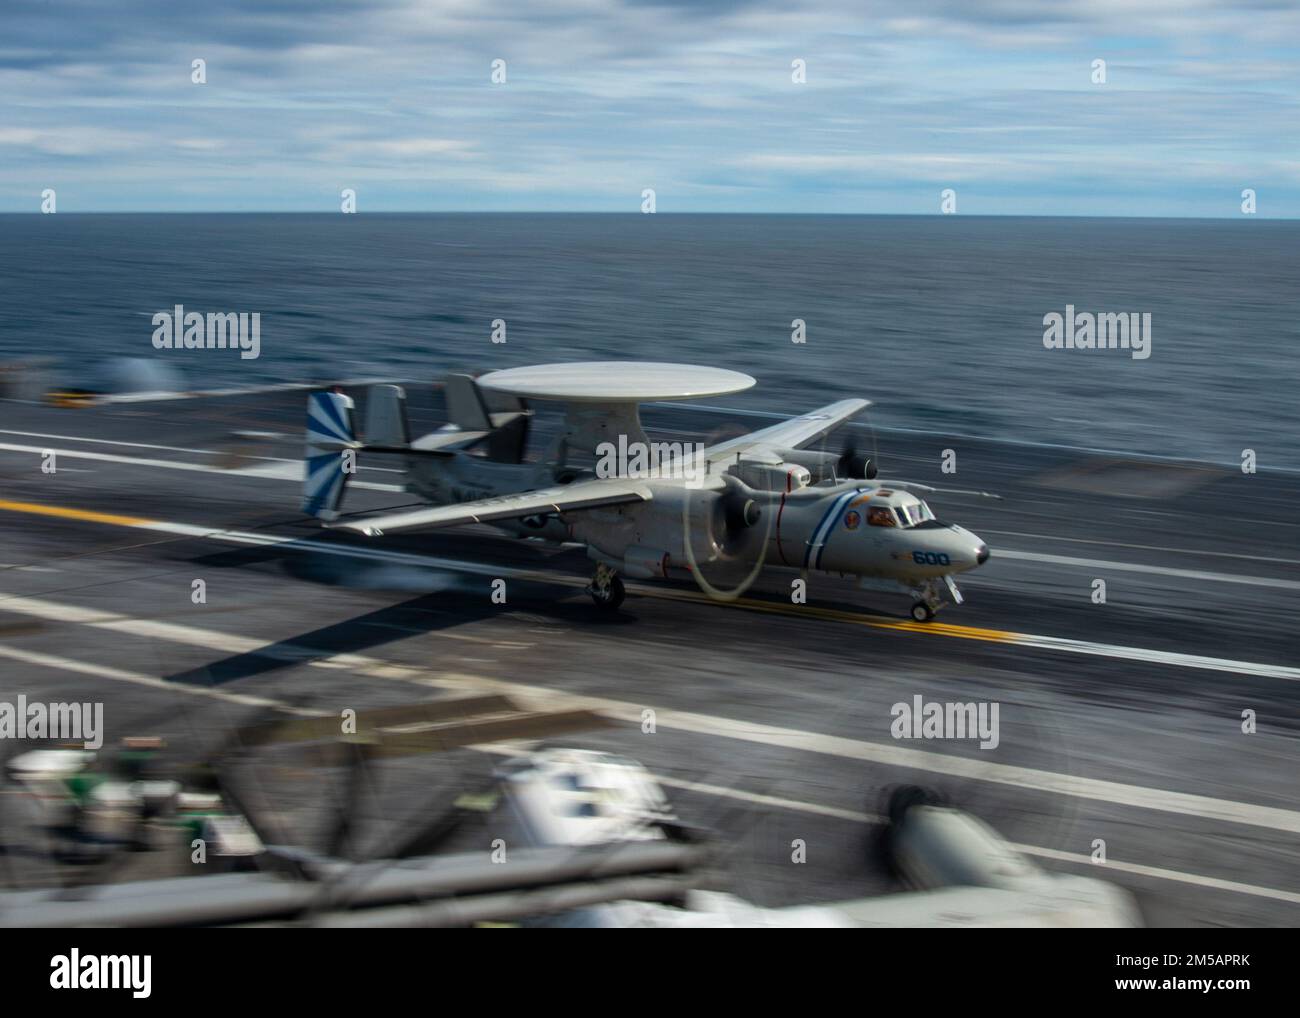 220216-N-WD859-1177 ATLANTIC OCEAN (Feb. 16, 2022) An E2-D “Hawkeye” aircraft, attached to Carrier Airborne Early Warning Squadron (VAW) 121, lands on the flight deck of the aircraft carrier USS George H.W. Bush (CVN 77) during Tailored Ship’s Training Availability/Final Evaluation Problem (TSTA/FEP), Feb. 16. TSTA/FEP is a multi-phase training evolution designed to give the crew a solid foundation of unit-level operating proficiency and to enhance the ship’s ability to self-train. George H.W. Bush provides the national command authority flexible, tailorable war fighting capability through the Stock Photo